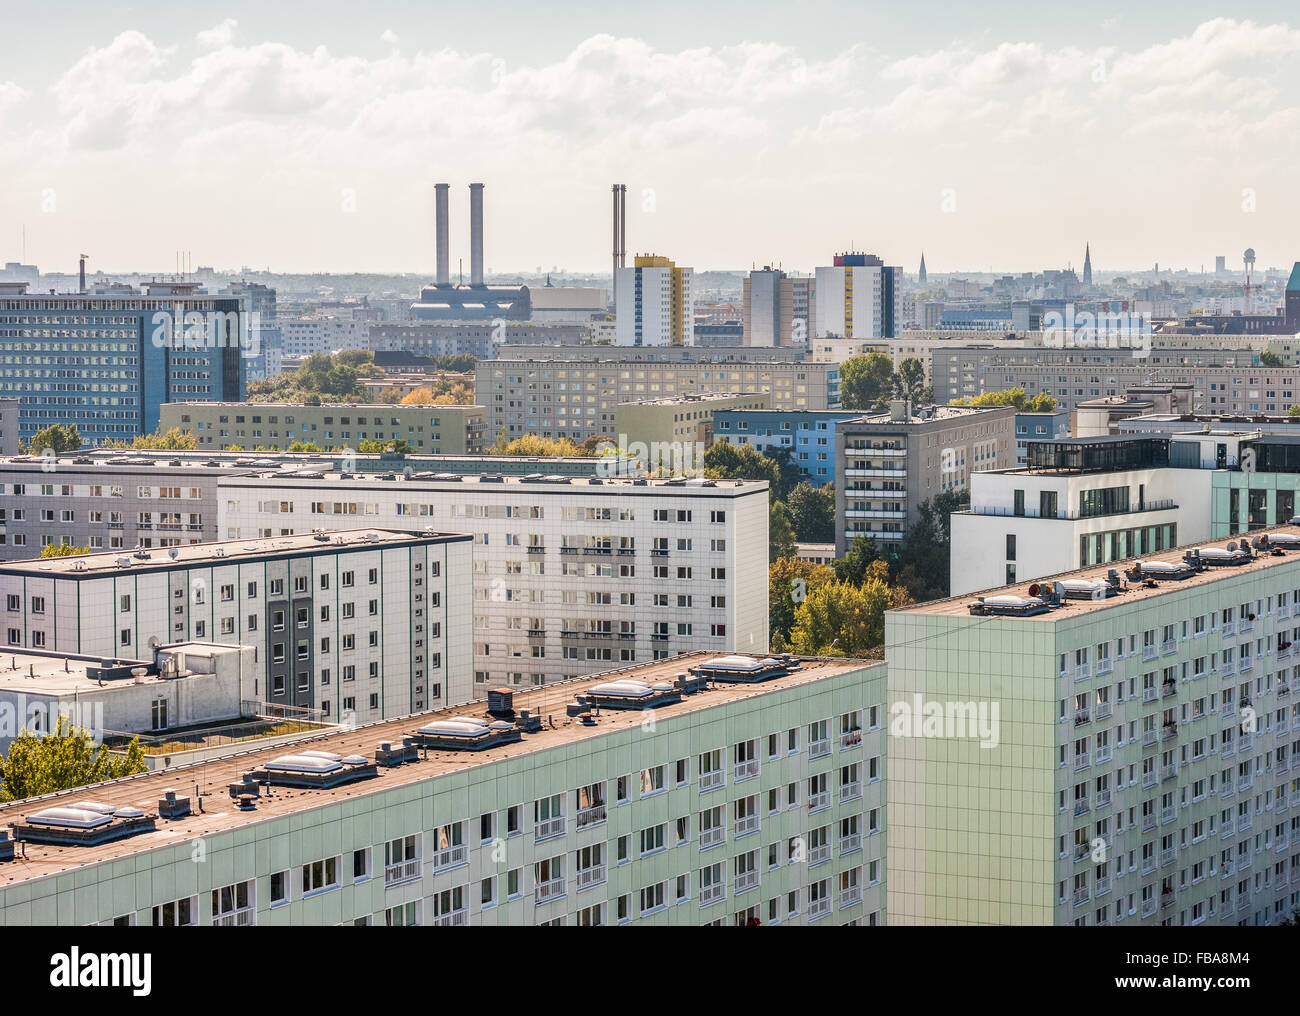 View over former East Berlin, Germany with characteristic architecture Stock Photo